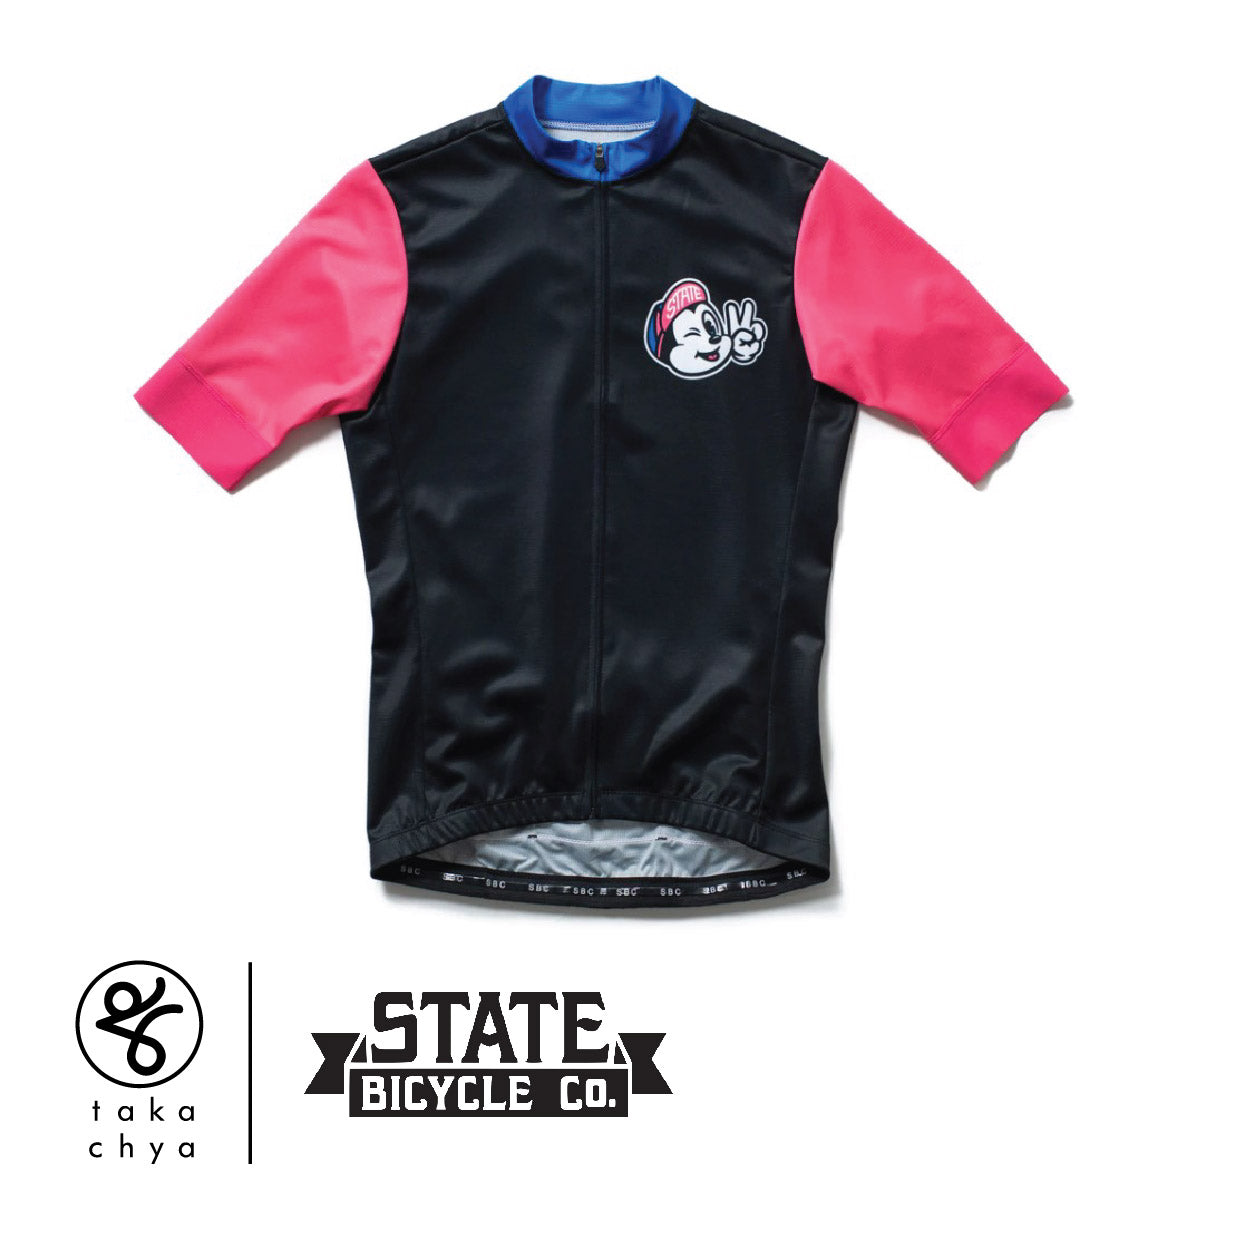 STATE BICYCLE CO. - "RELAX.." JERSEY - SUSTAINABLE CLOTHING COLLECTION (BLACK)